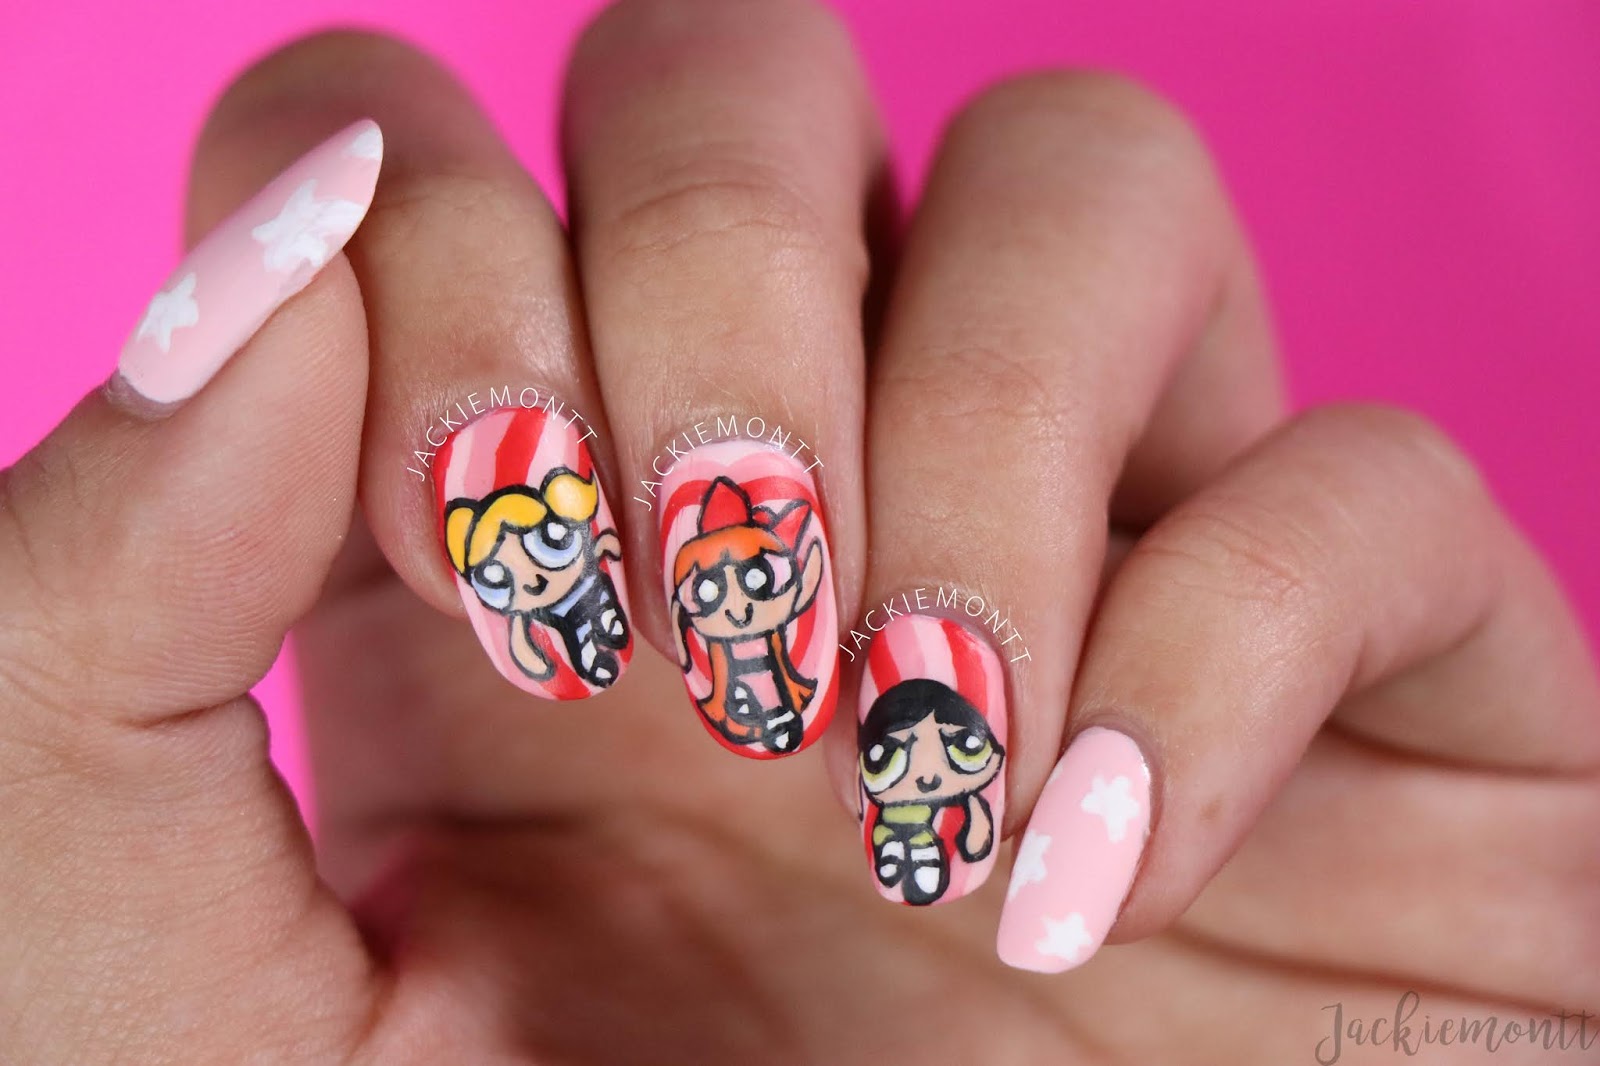 3. Trendy Nail Art Designs for Girls - wide 5